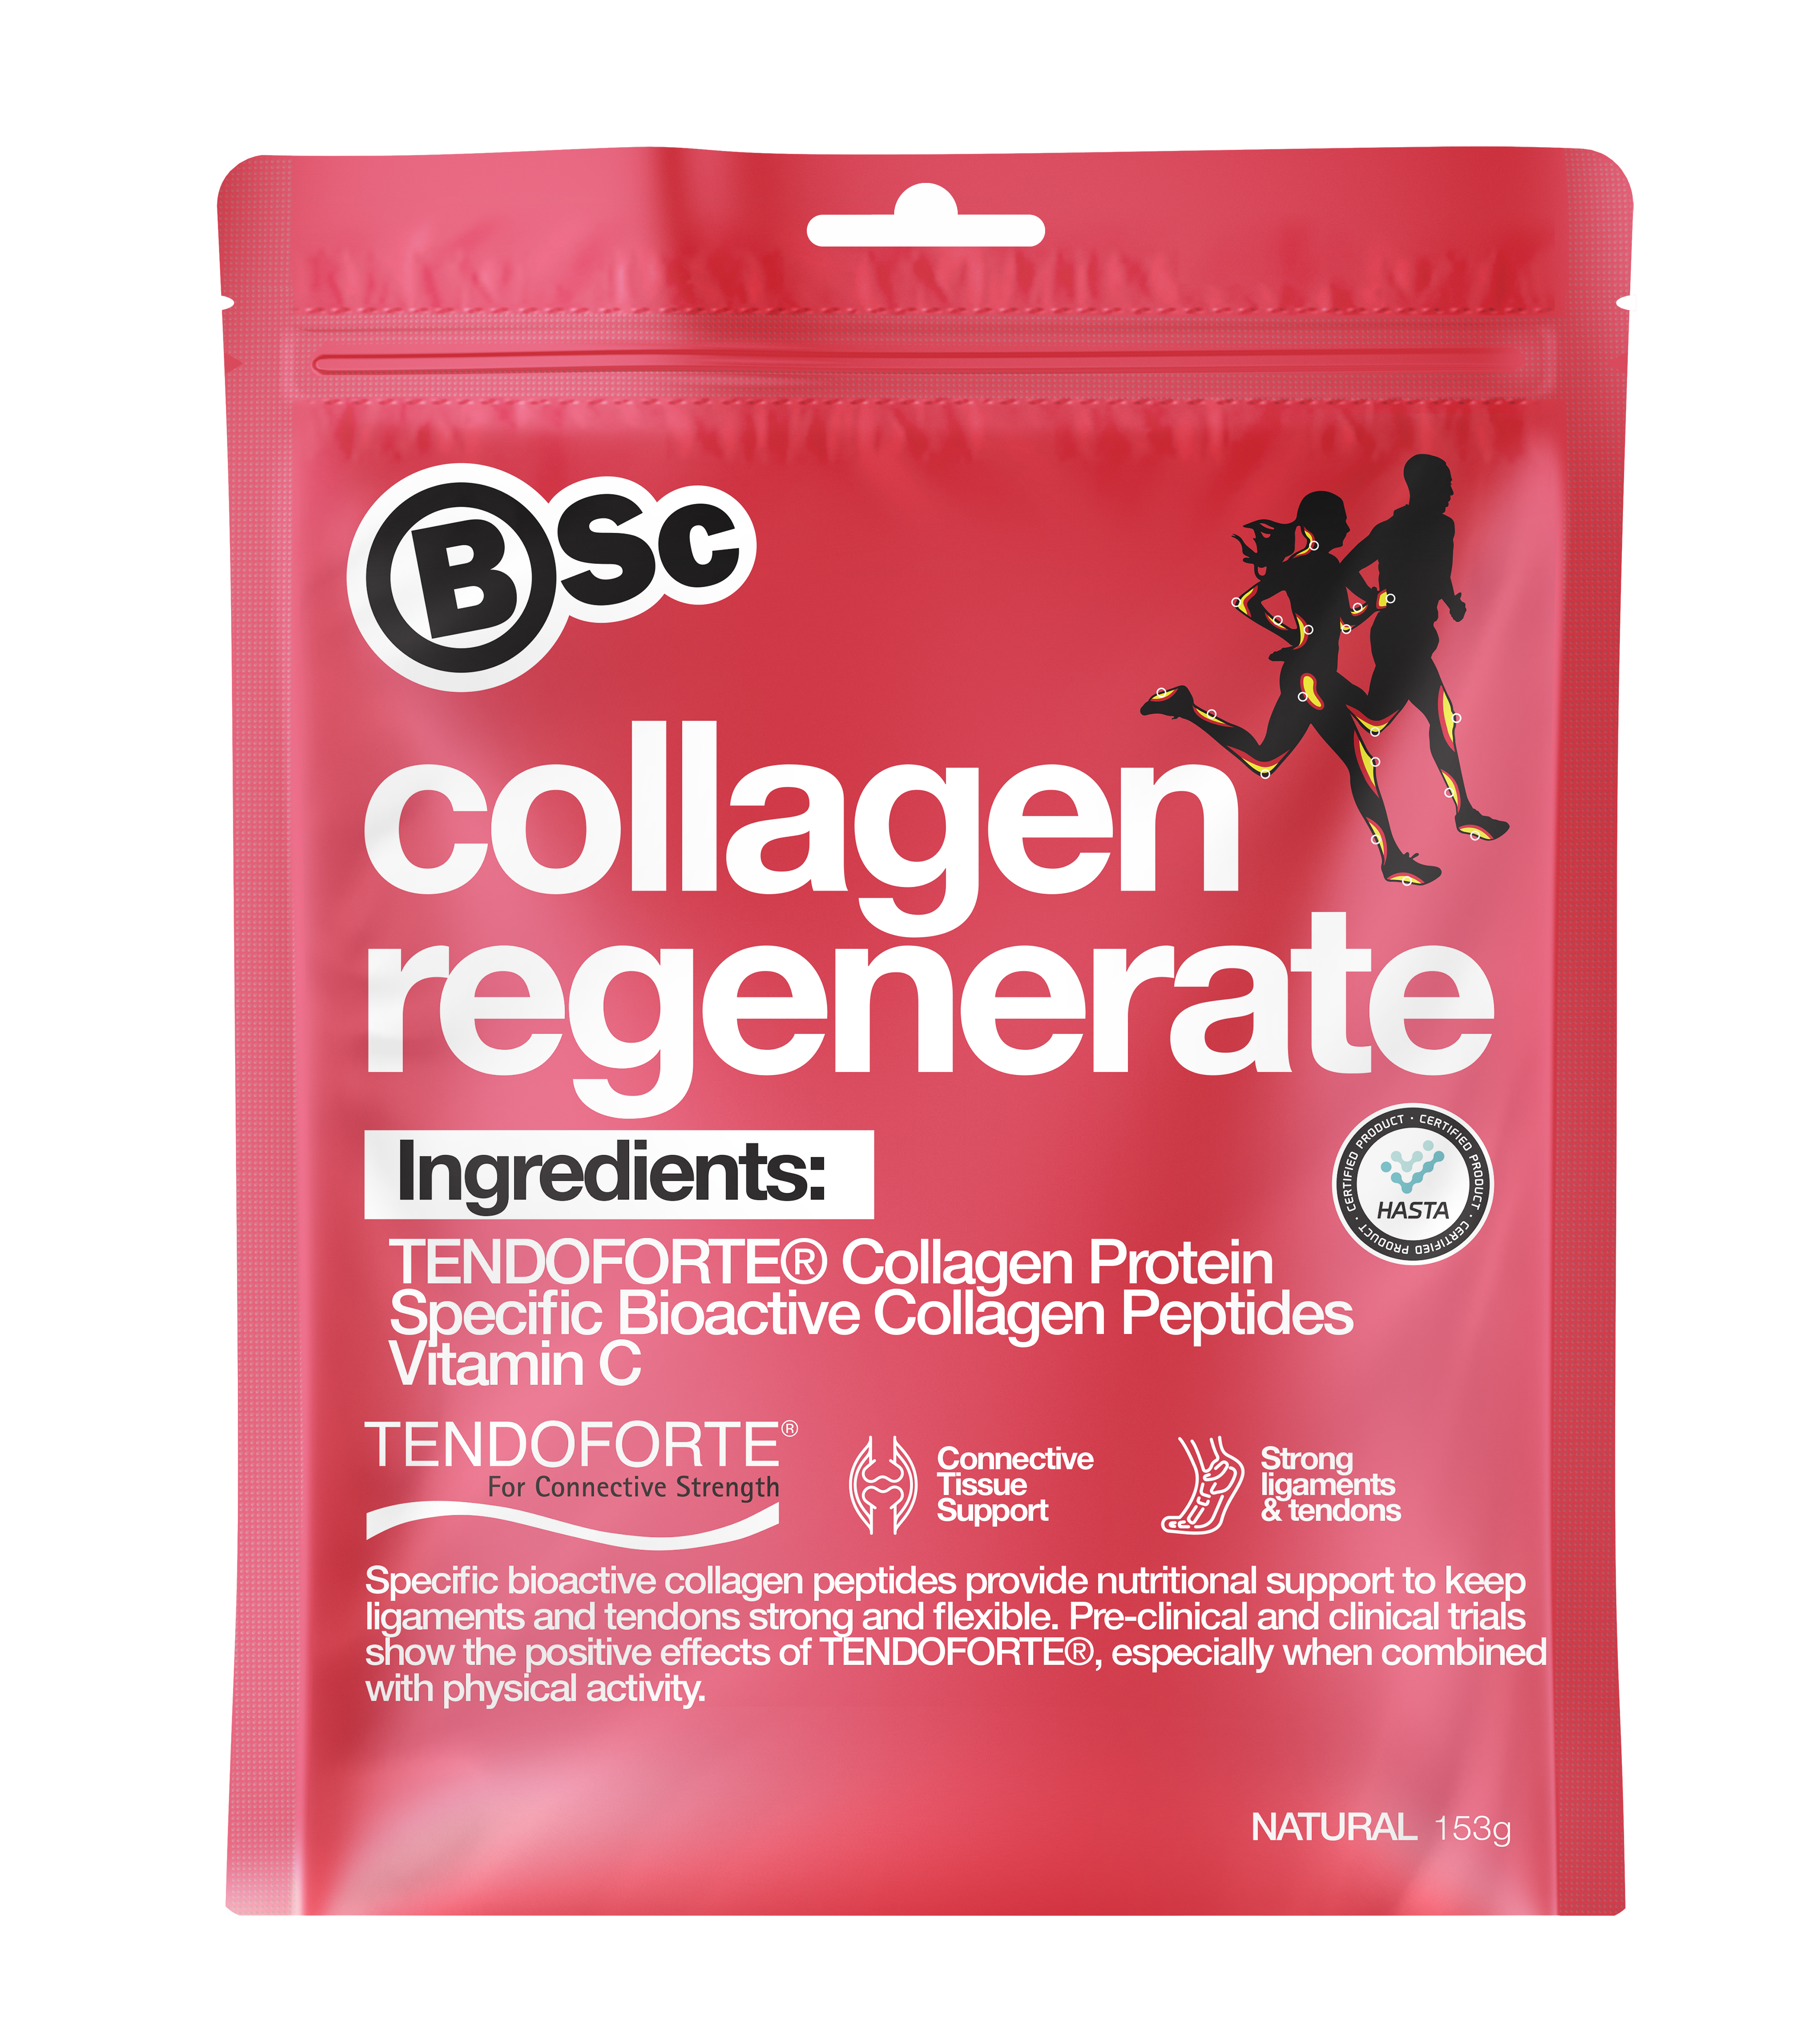 What you need to know about Collagen Regenerate